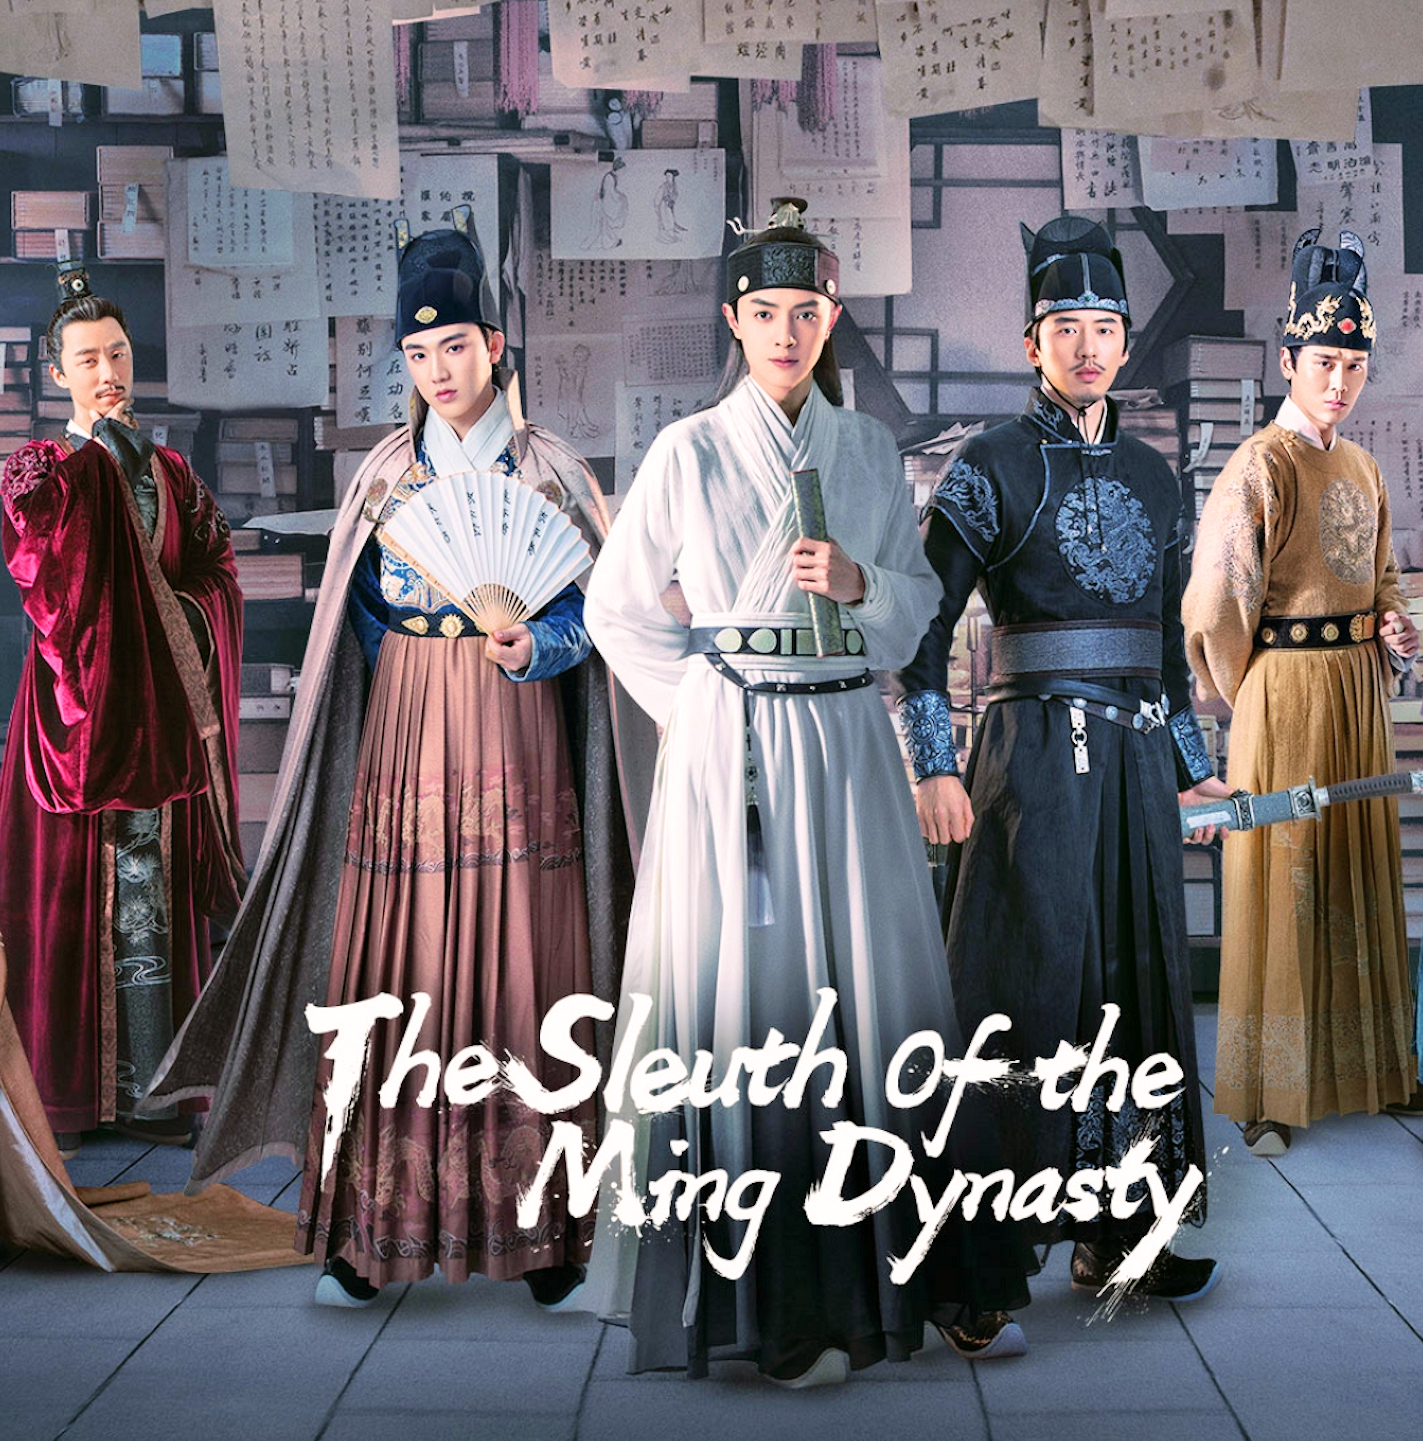 The Sleuth of Ming Dynasty 明代侦探. iQIYI (2020) (Ep.11 to 20)'s Love Without Gender